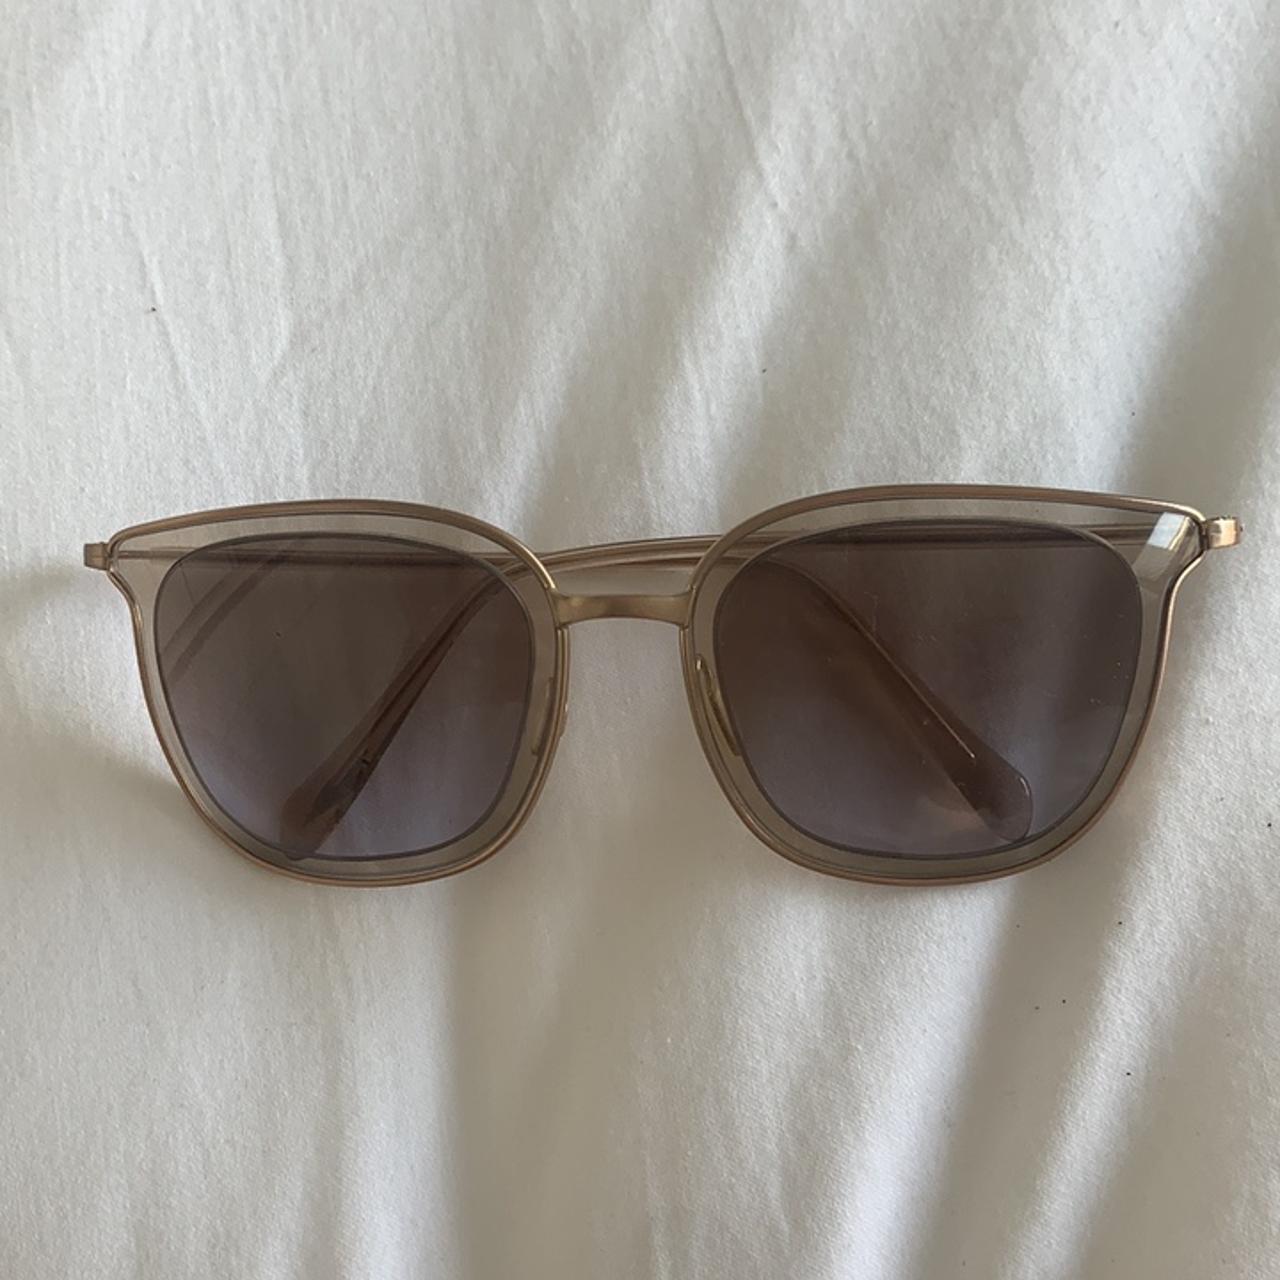 Oliver Peoples Women's Pink and Gold Sunglasses